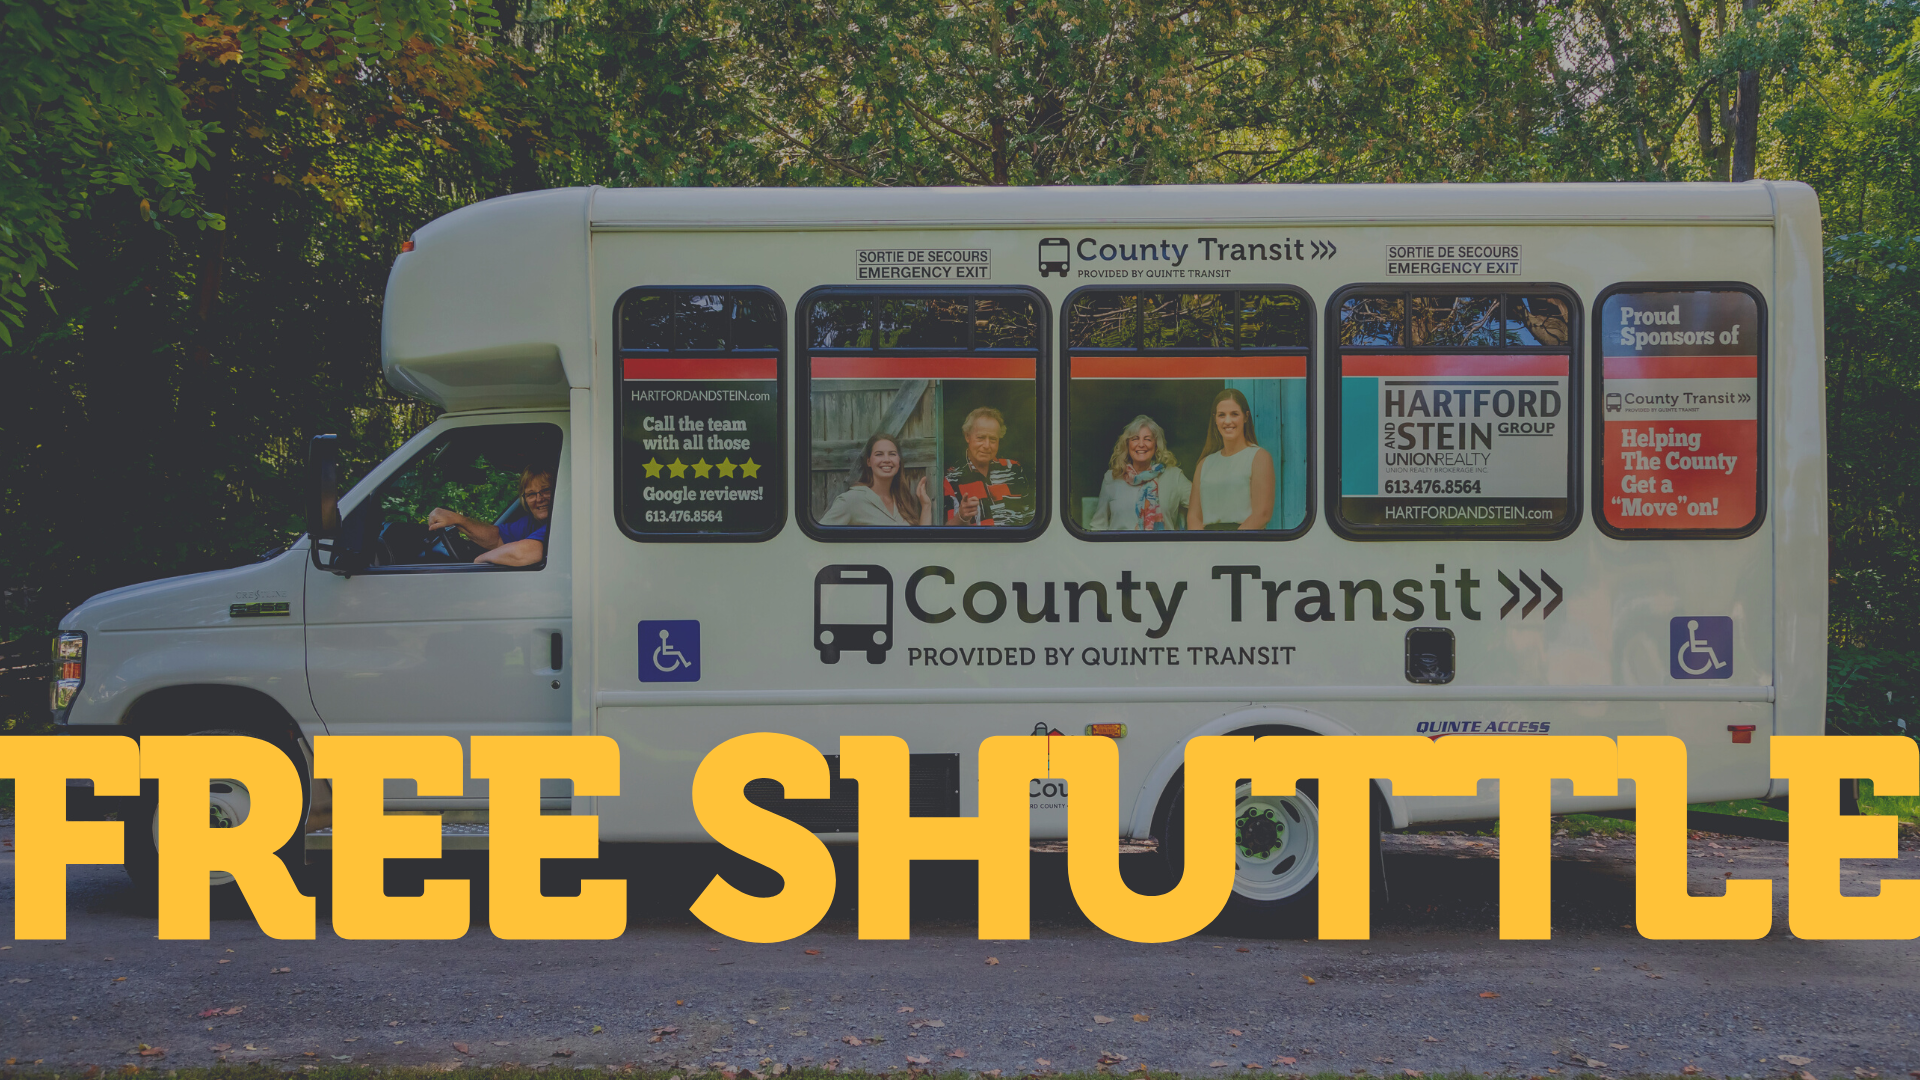 The County Transit bus parked in front of trees. Text on image says "Free Shuttle"